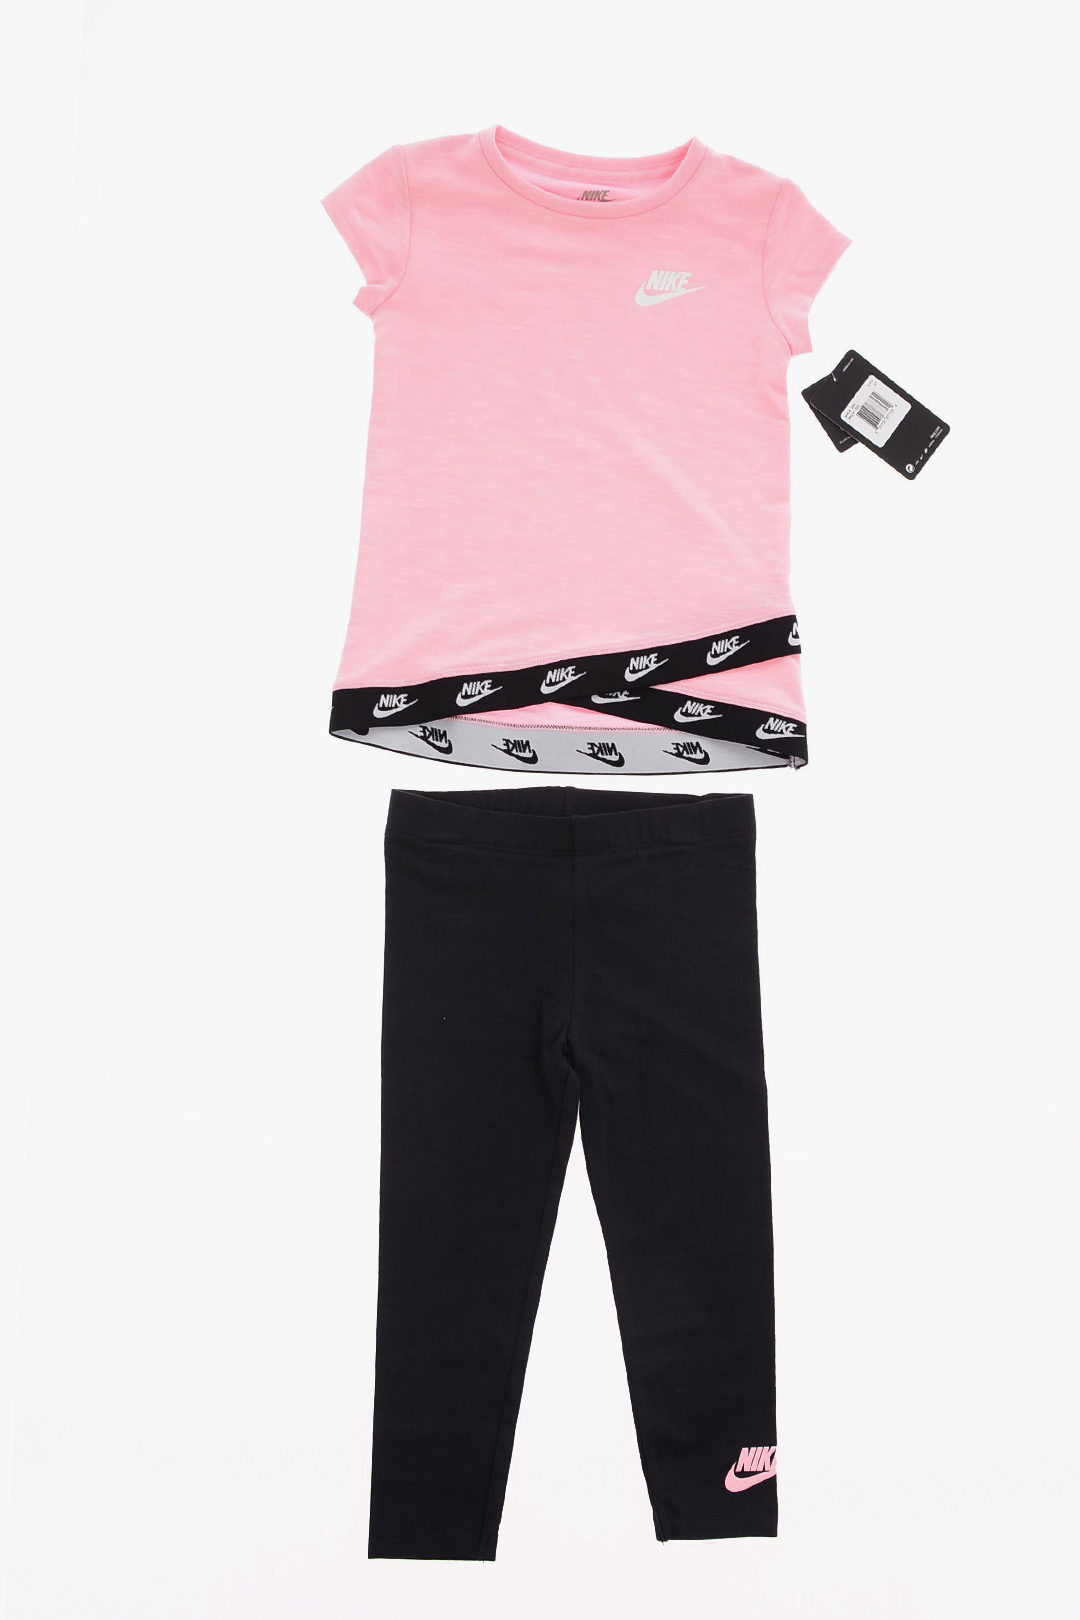 Buy Monte Carlo Girls Cotton Blend Printed Blue, Sky T-Shirt and Track Pants  (Set of 2) online